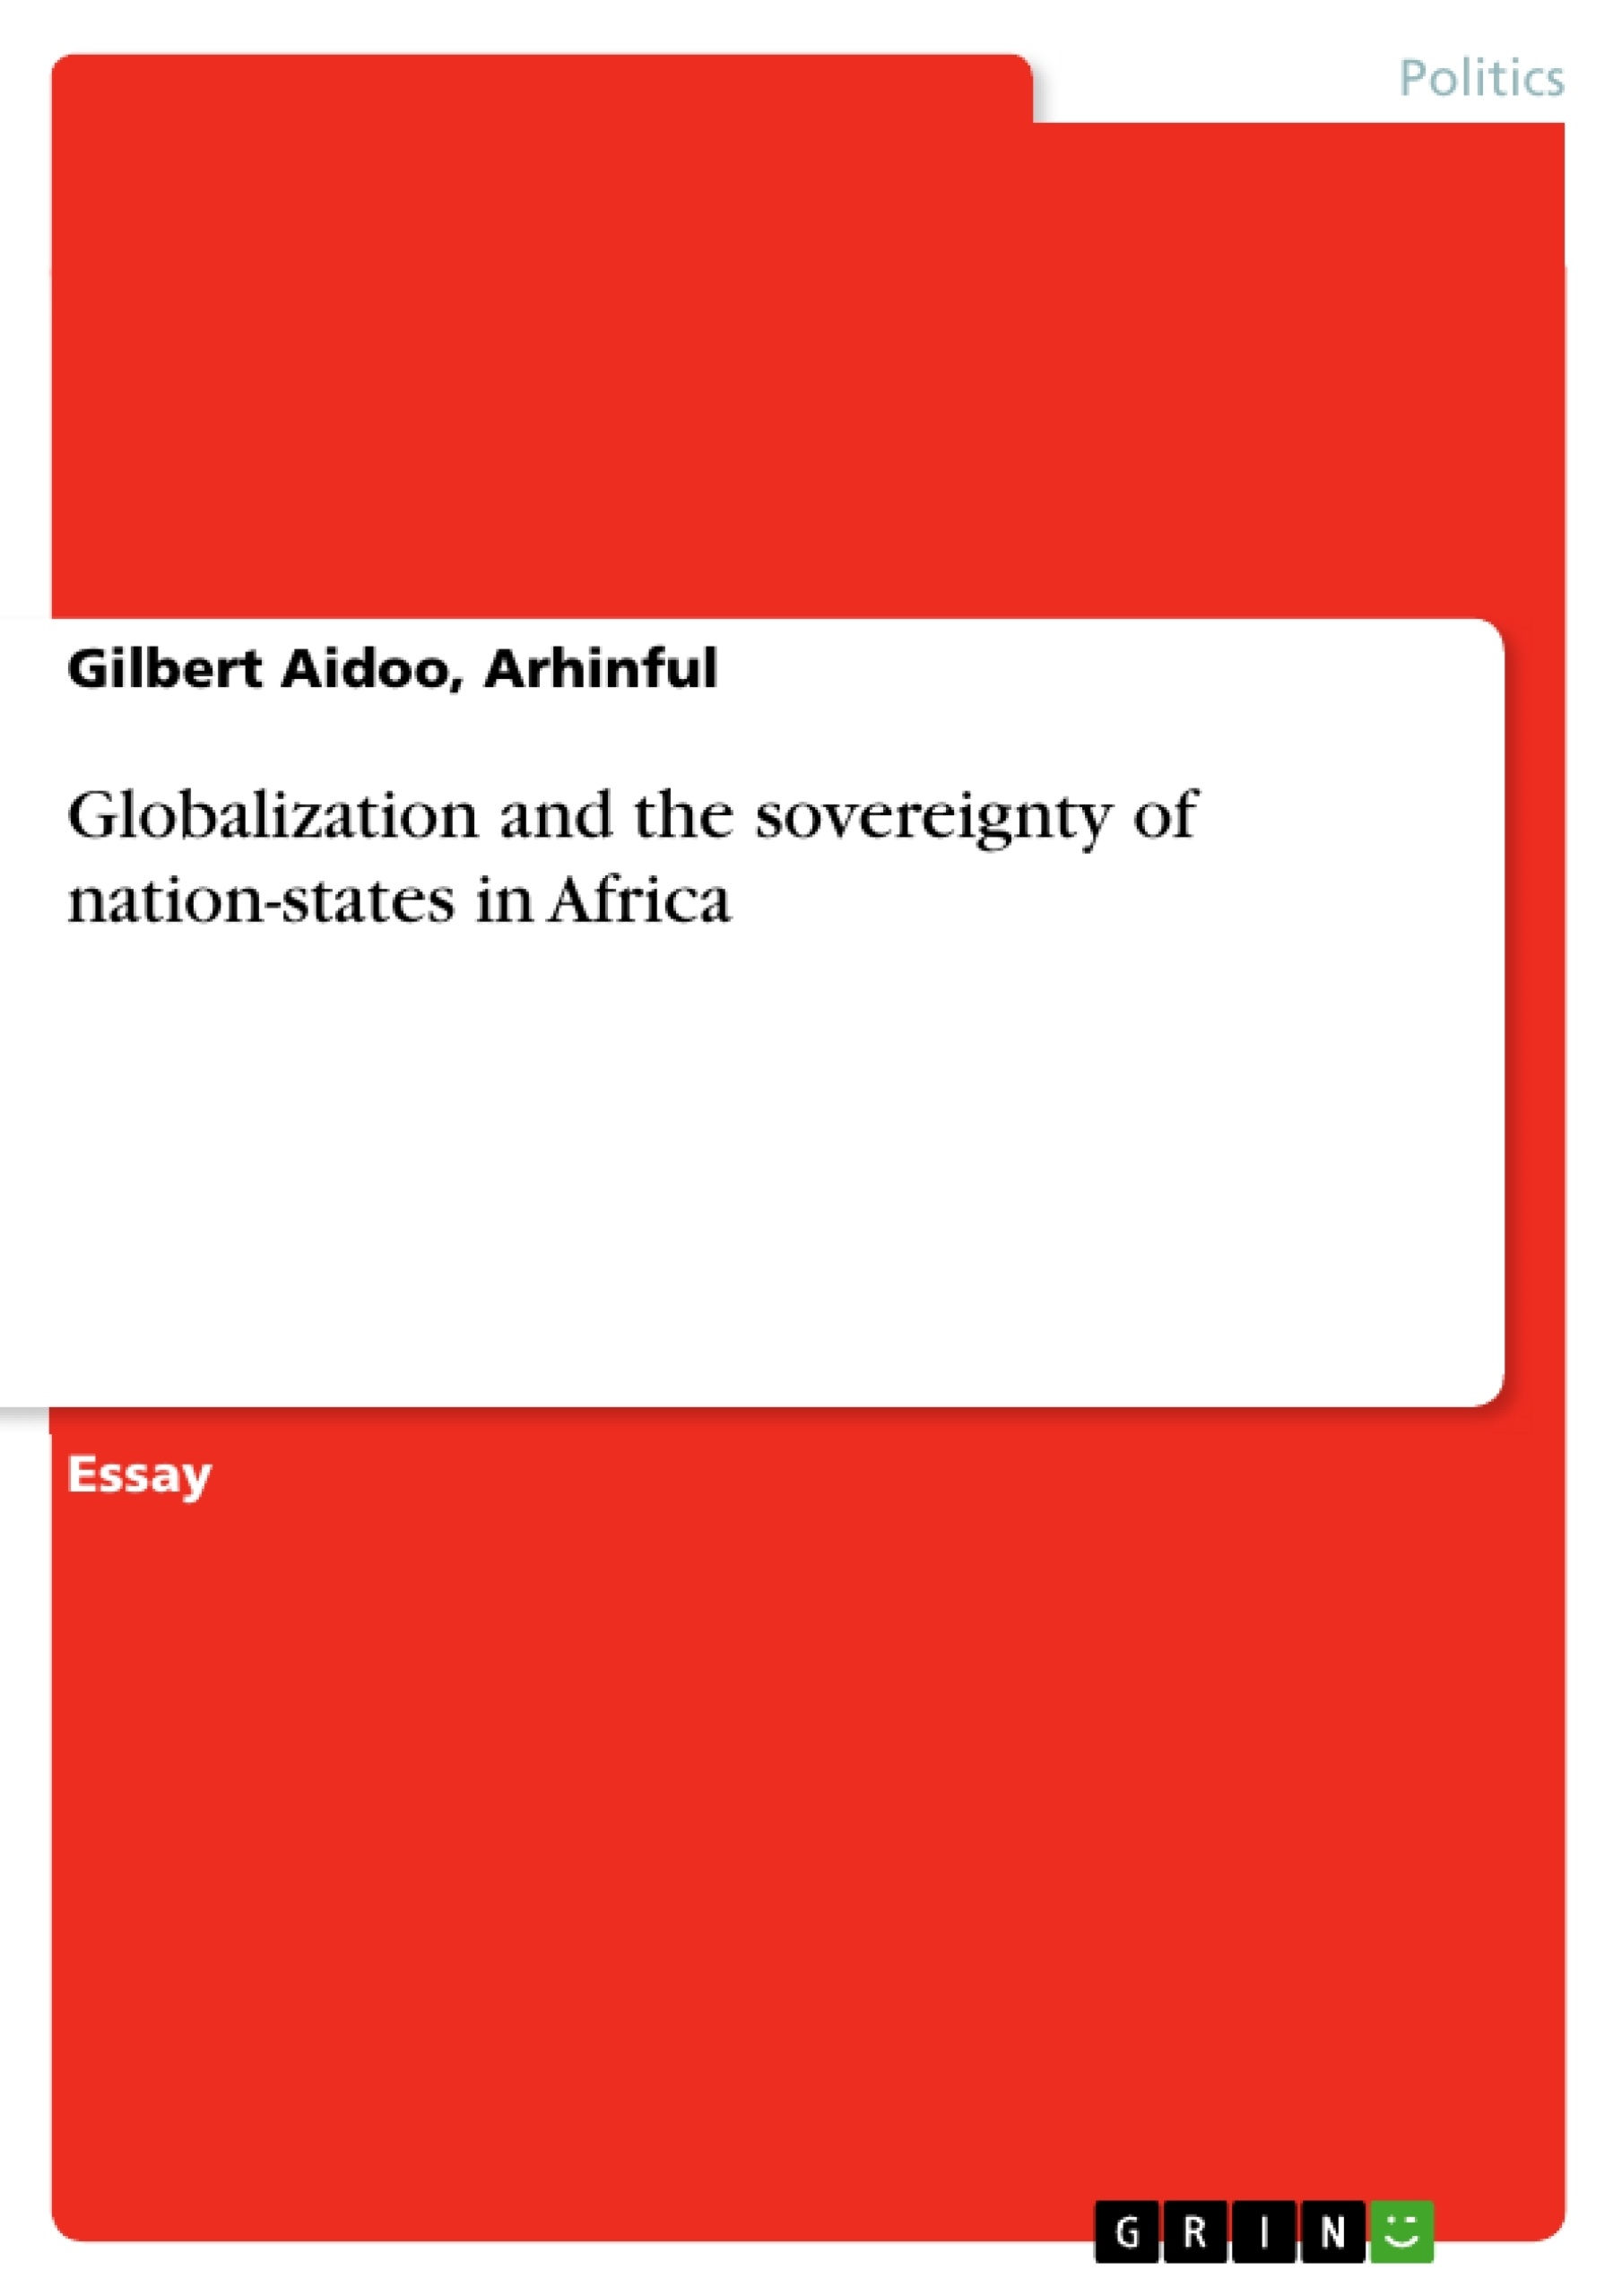 Title: Globalization and the sovereignty of nation-states in Africa